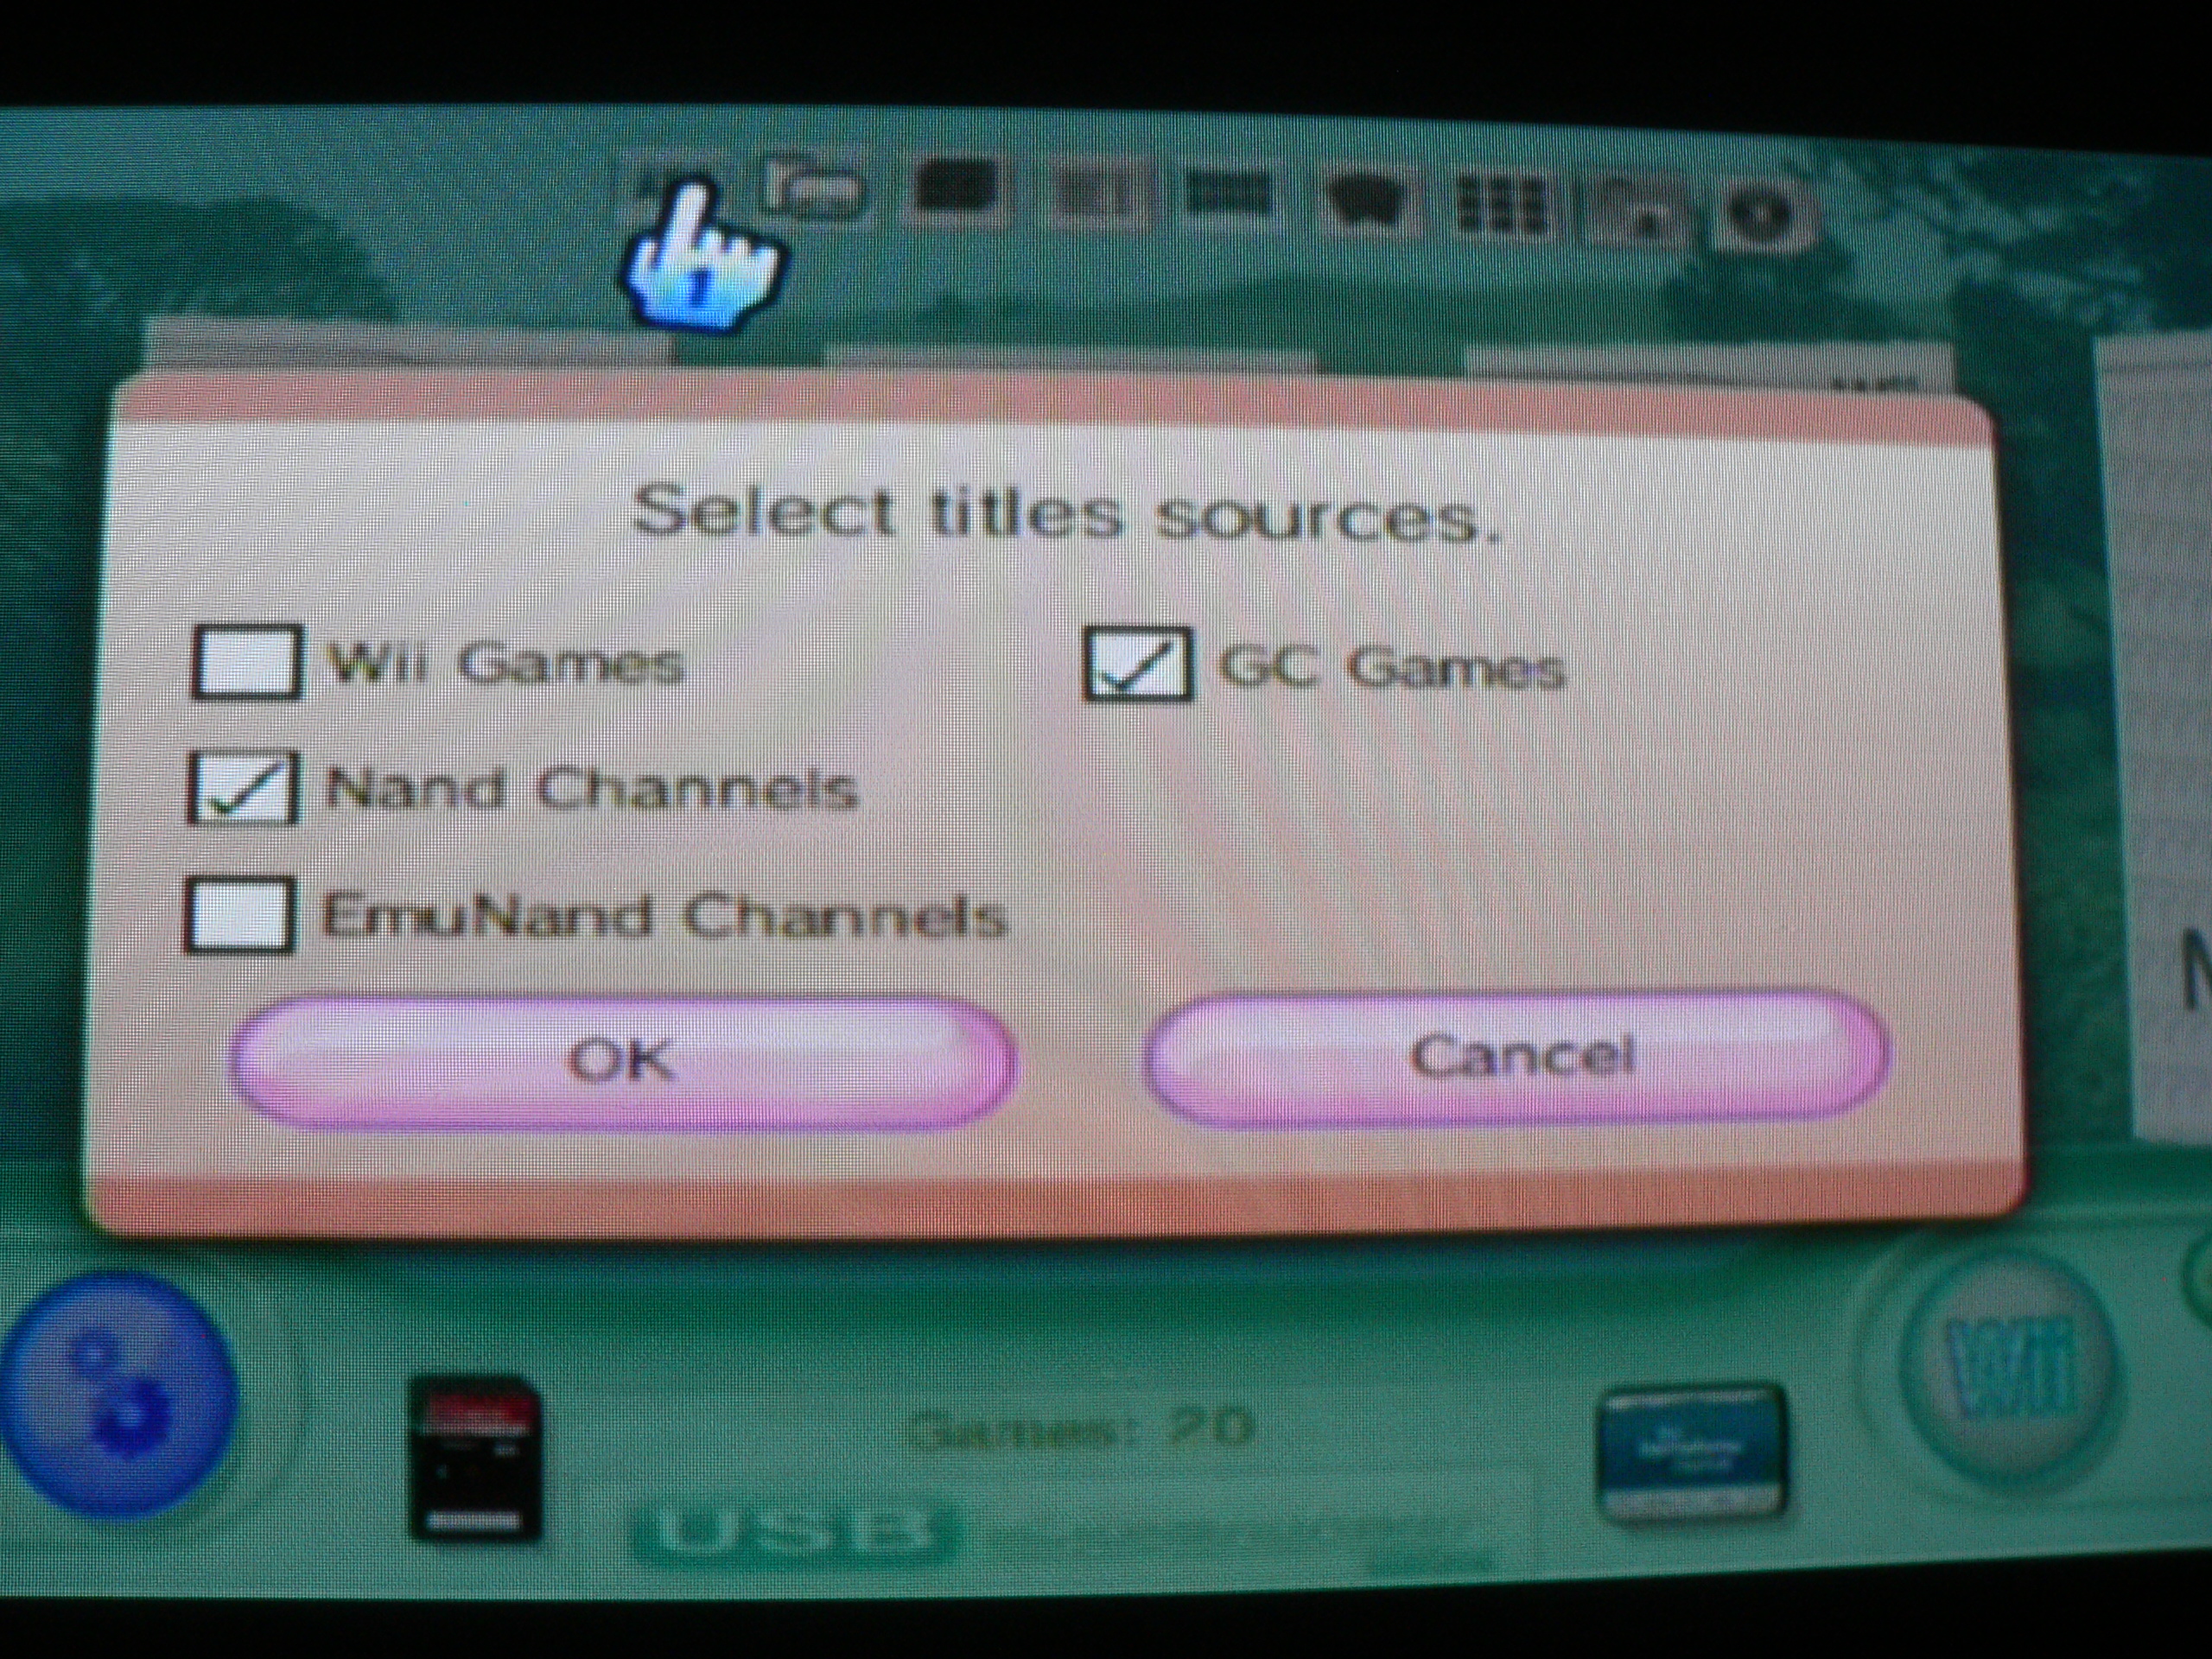 USB Loader Gx is loading wii channel files instead of games | GBAtemp.net -  The Independent Video Game Community